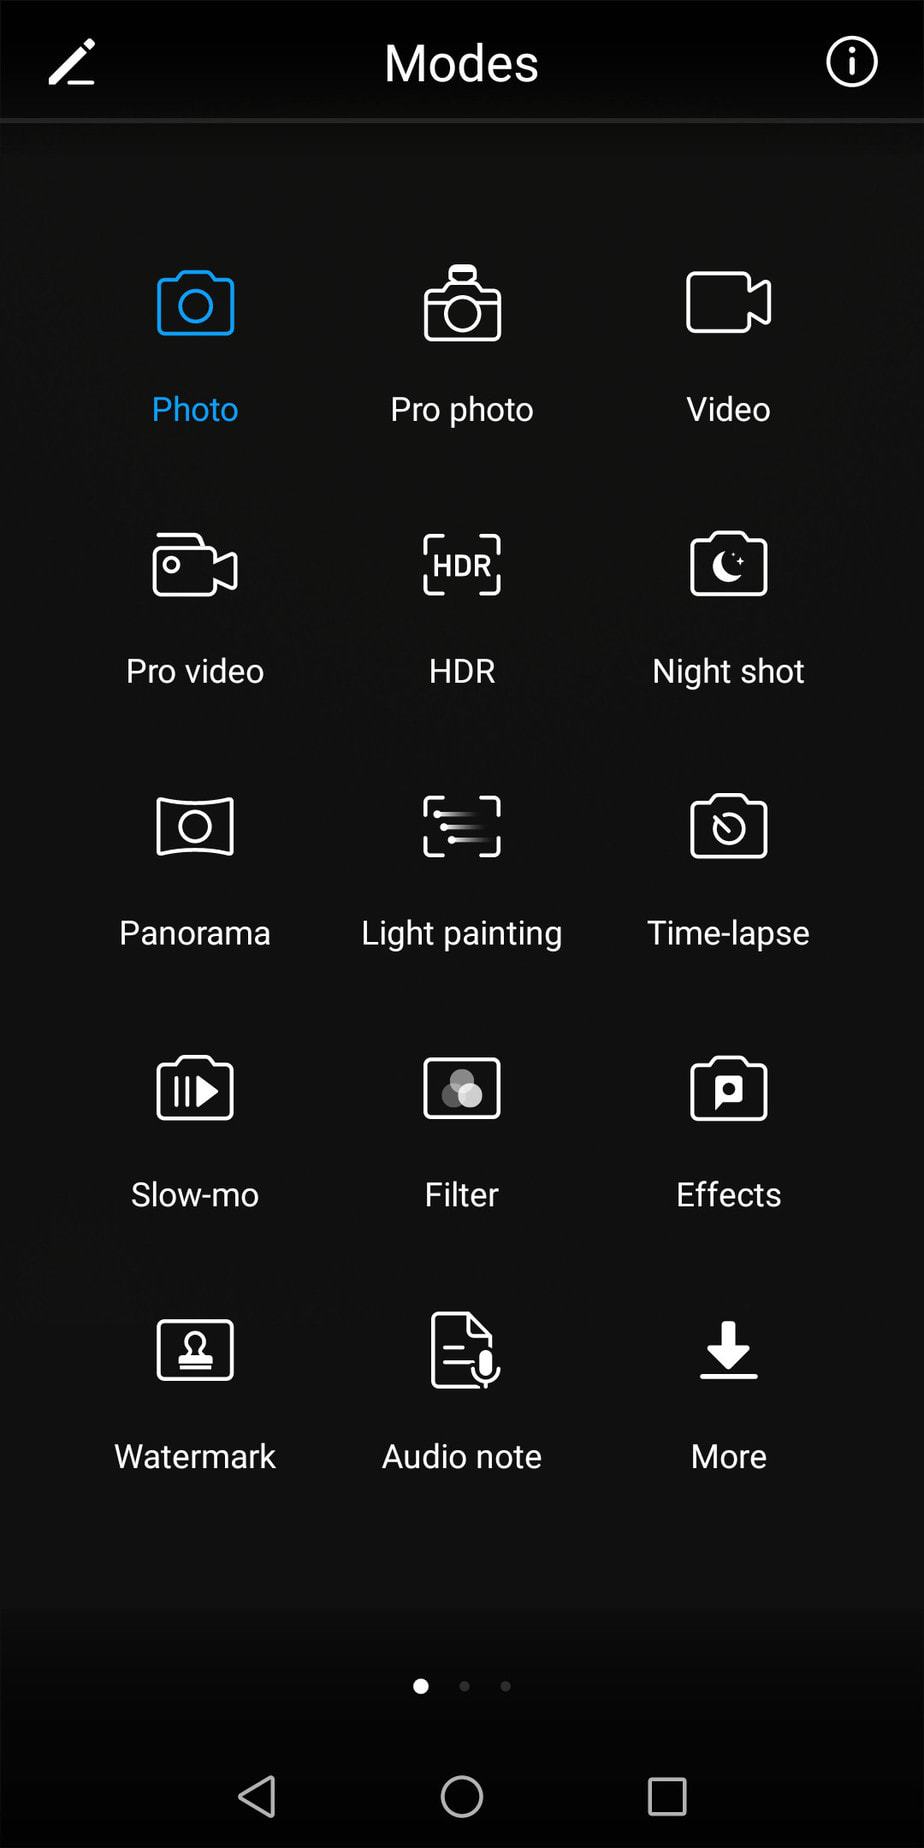 Smartphone Photography modes